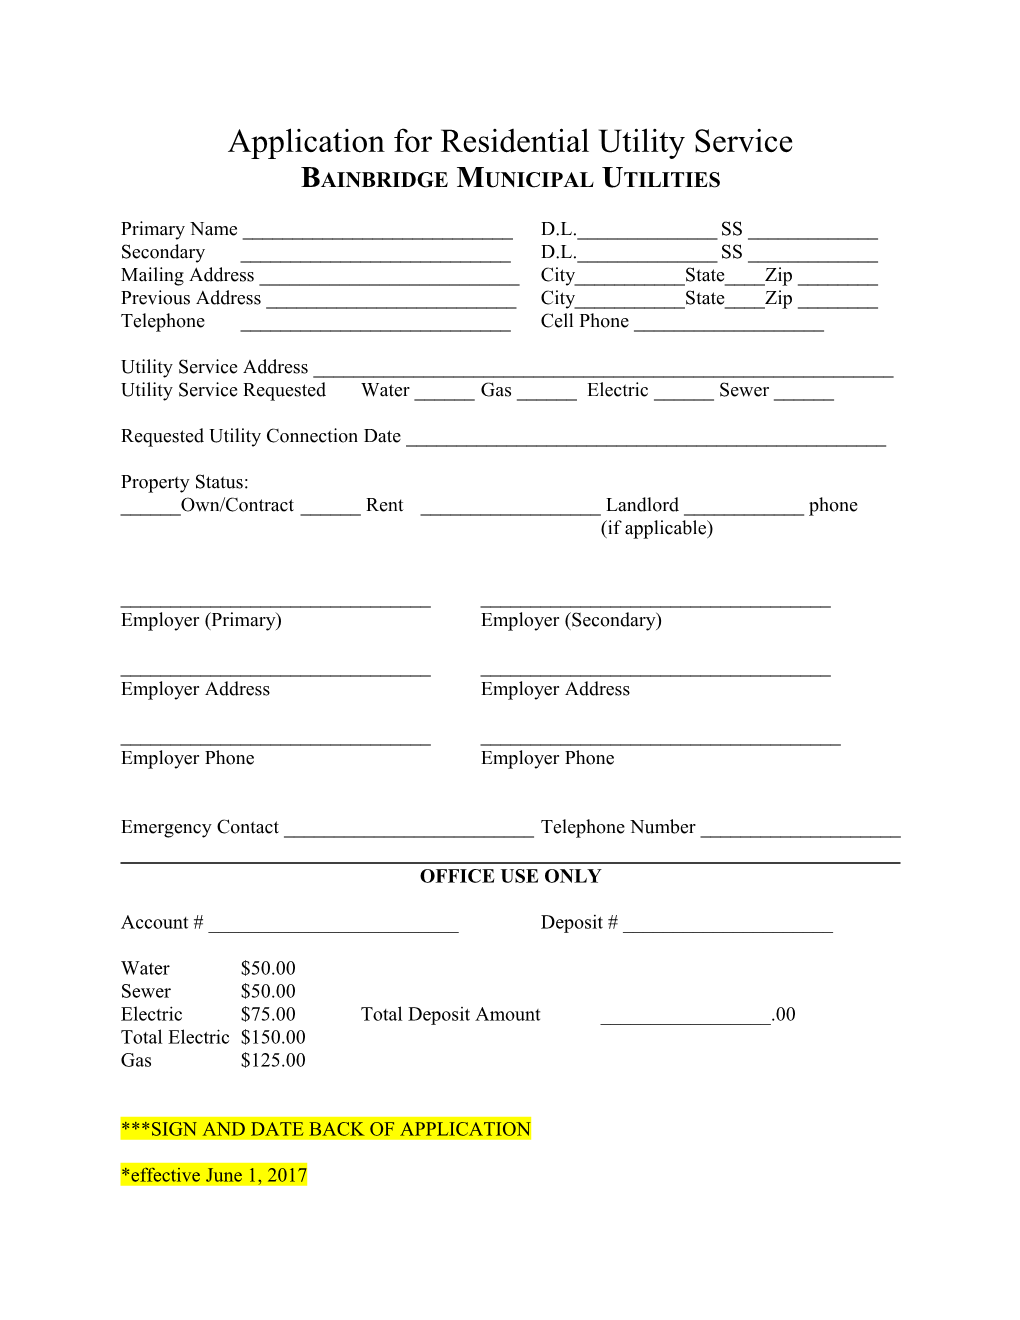 Application for Residential Utility Service